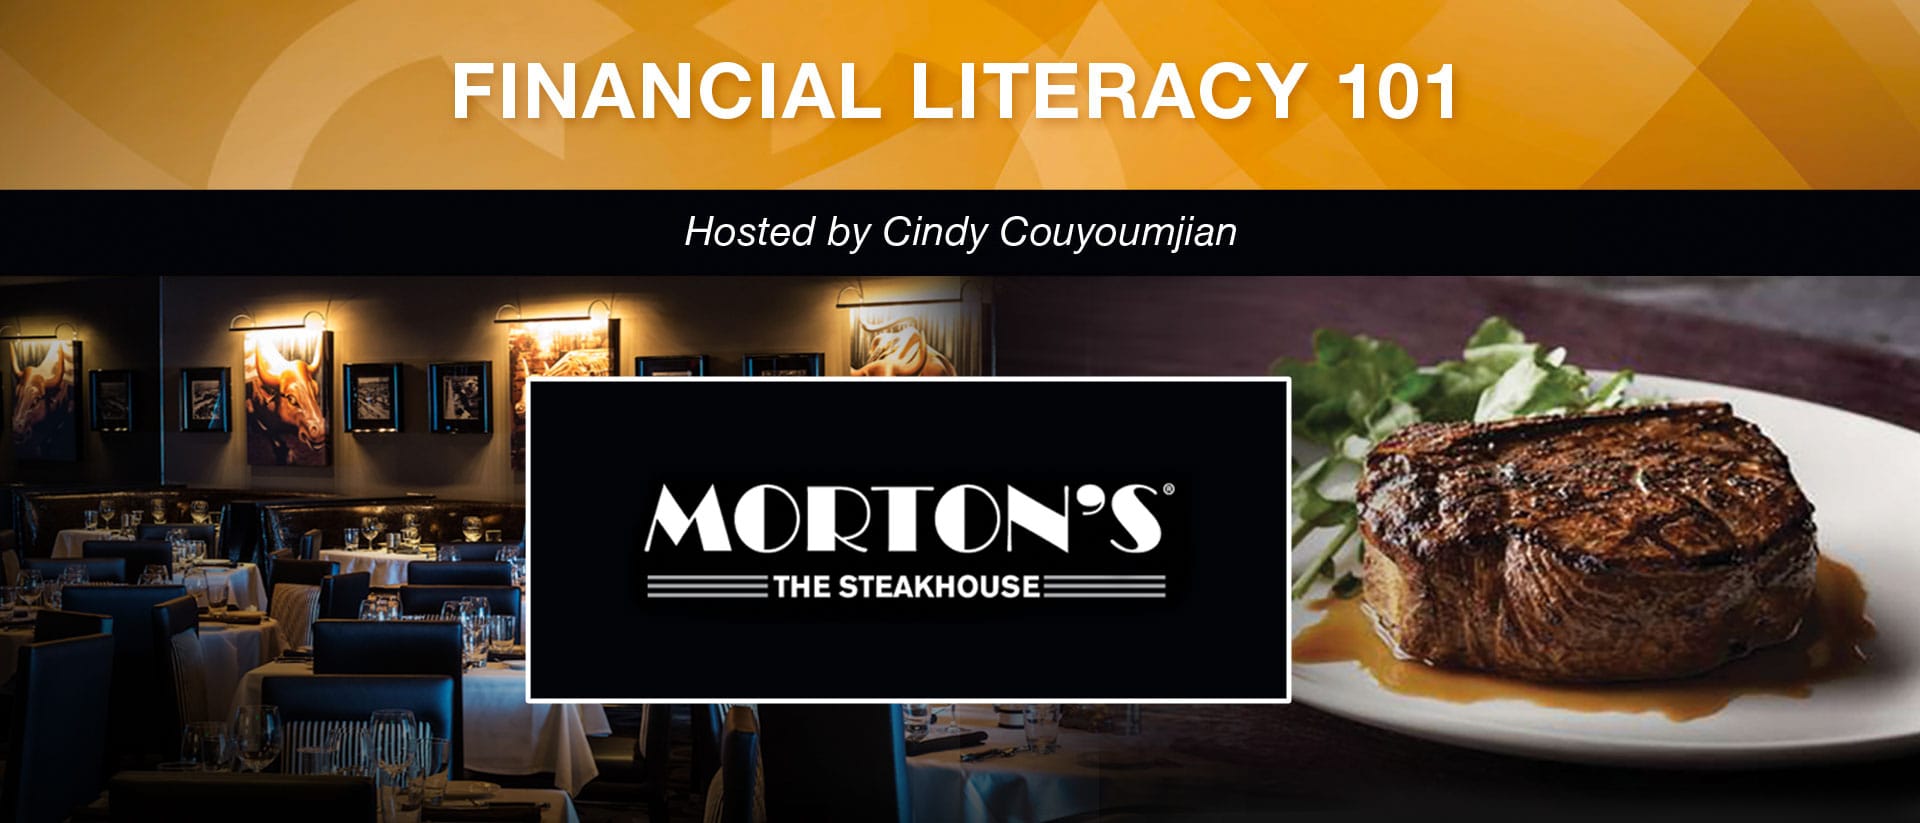 Event cinergy financial literacy 101 mortions